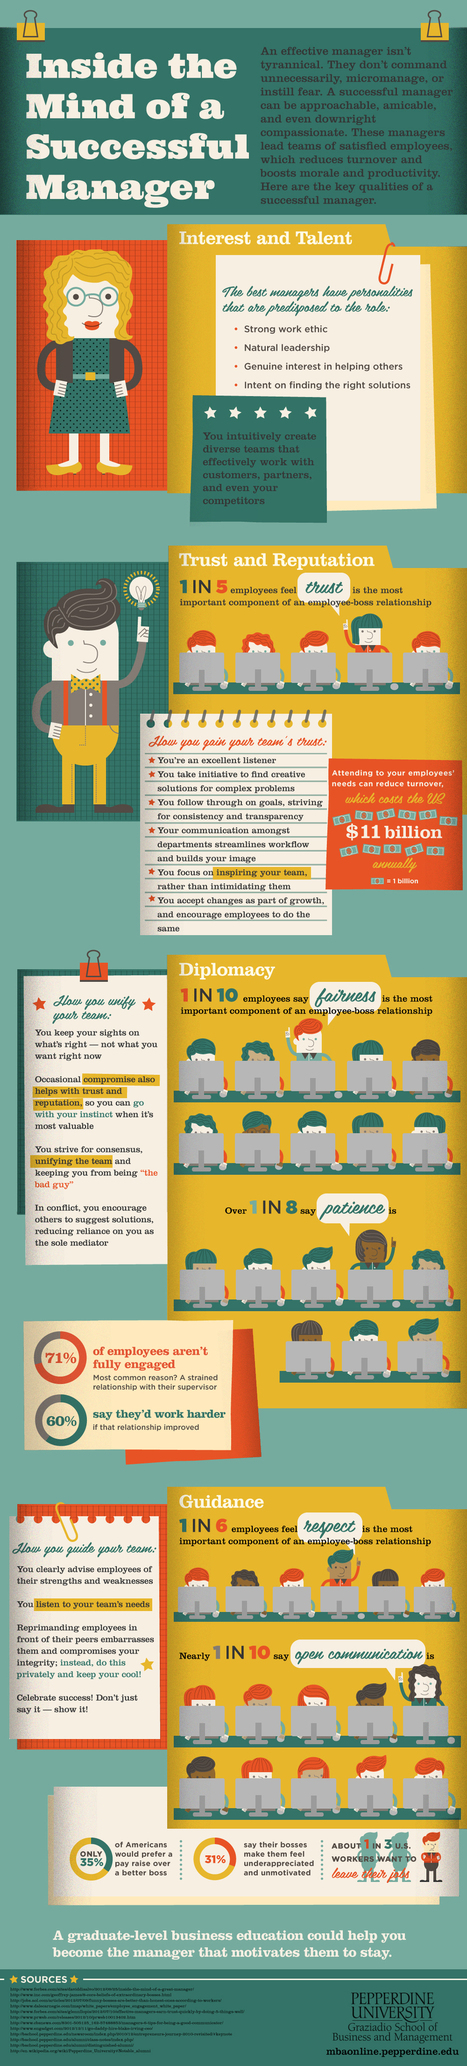 (Infographic) What Makes a Successful Manager? | Strictly pedagogical | Scoop.it